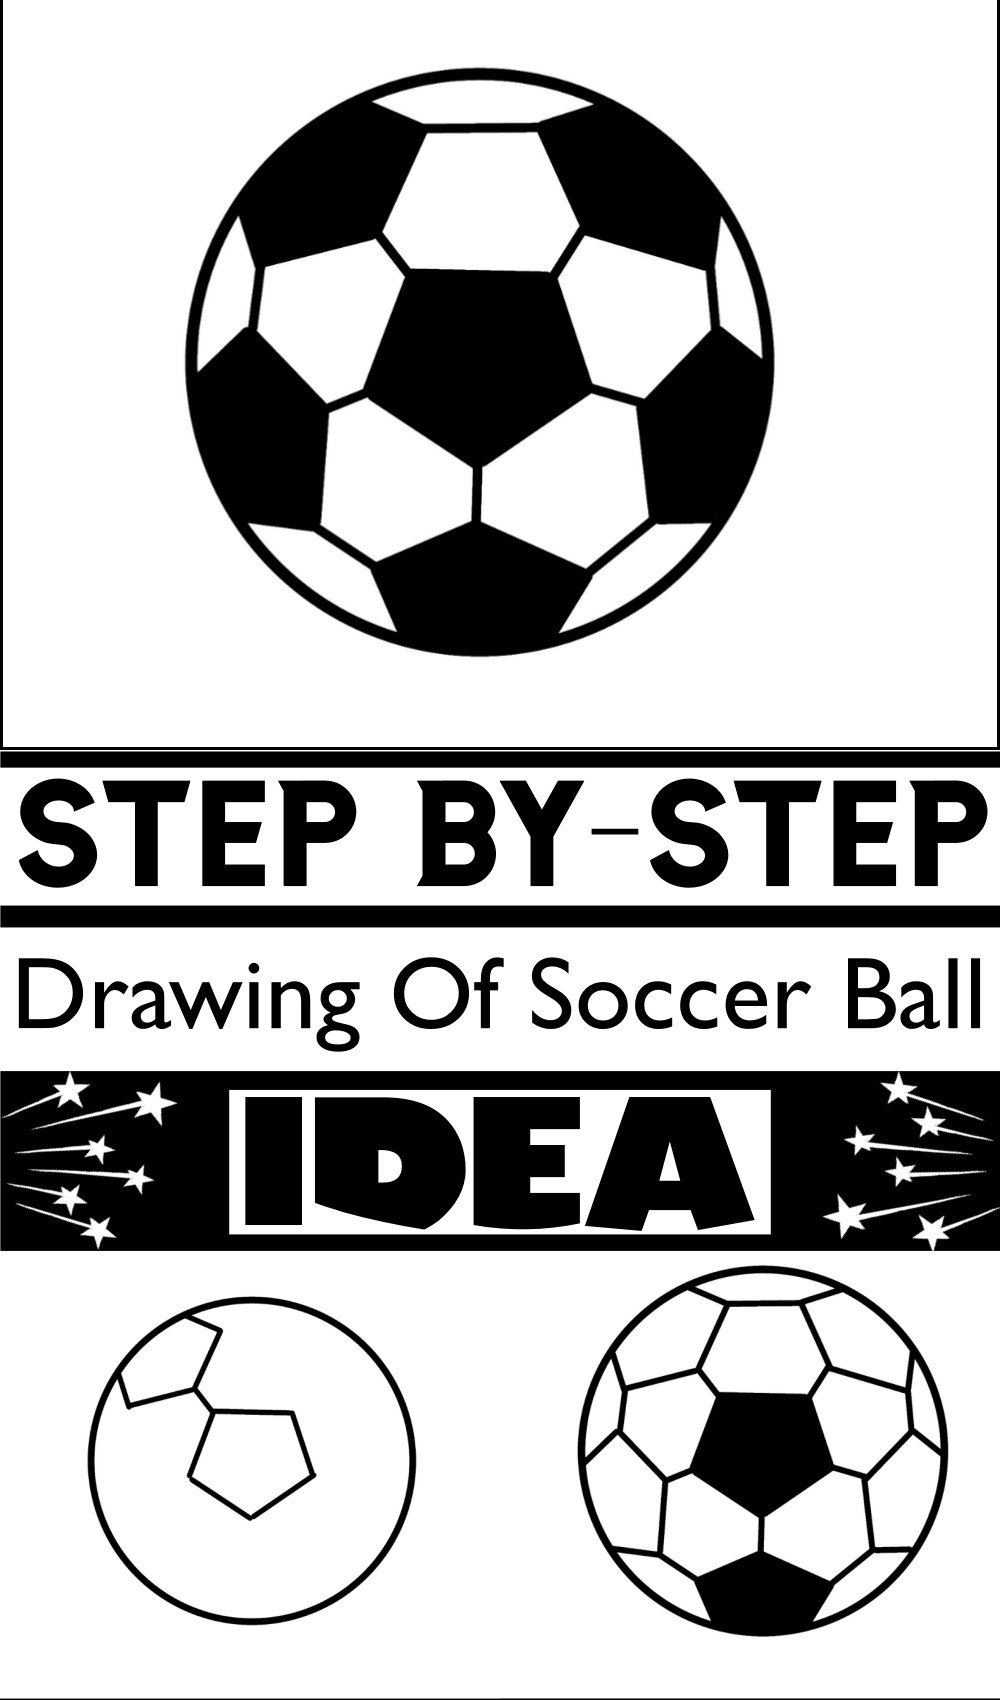 Step By-Step Drawing Of Soccer Ball